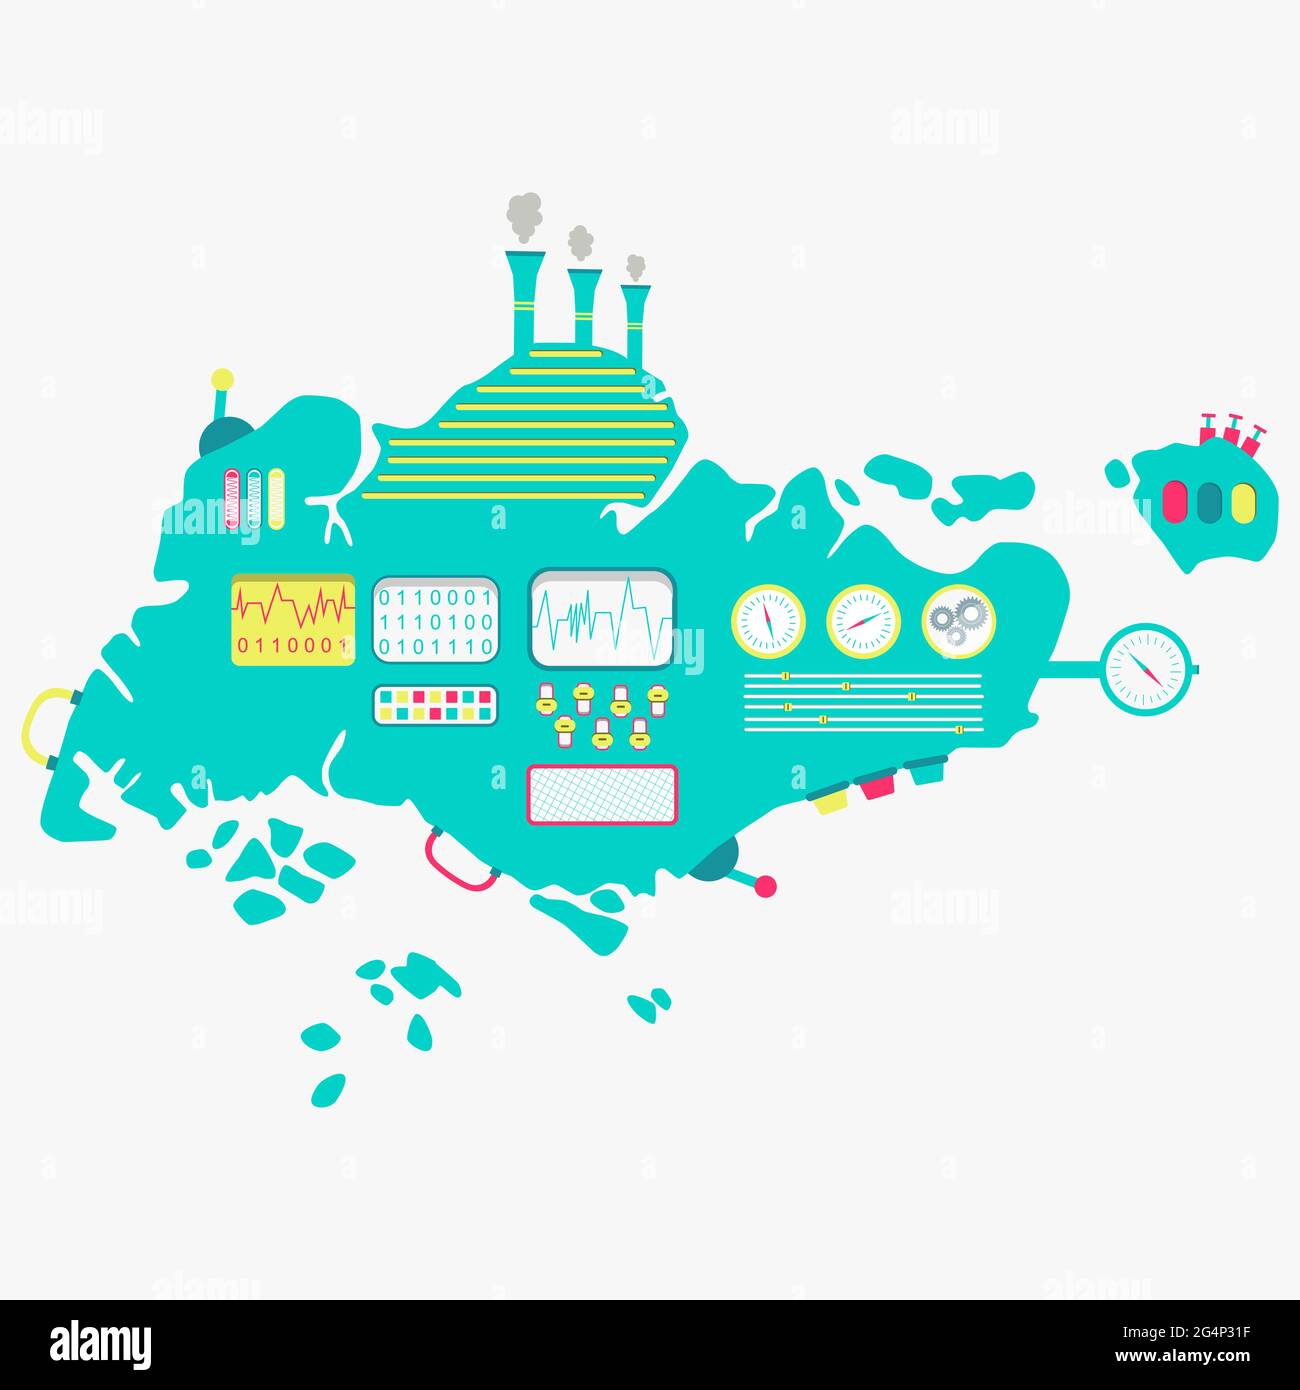 Map of Singapore like a cute machine with buttons, panels and levers. Isolated. White background. Stock Vector